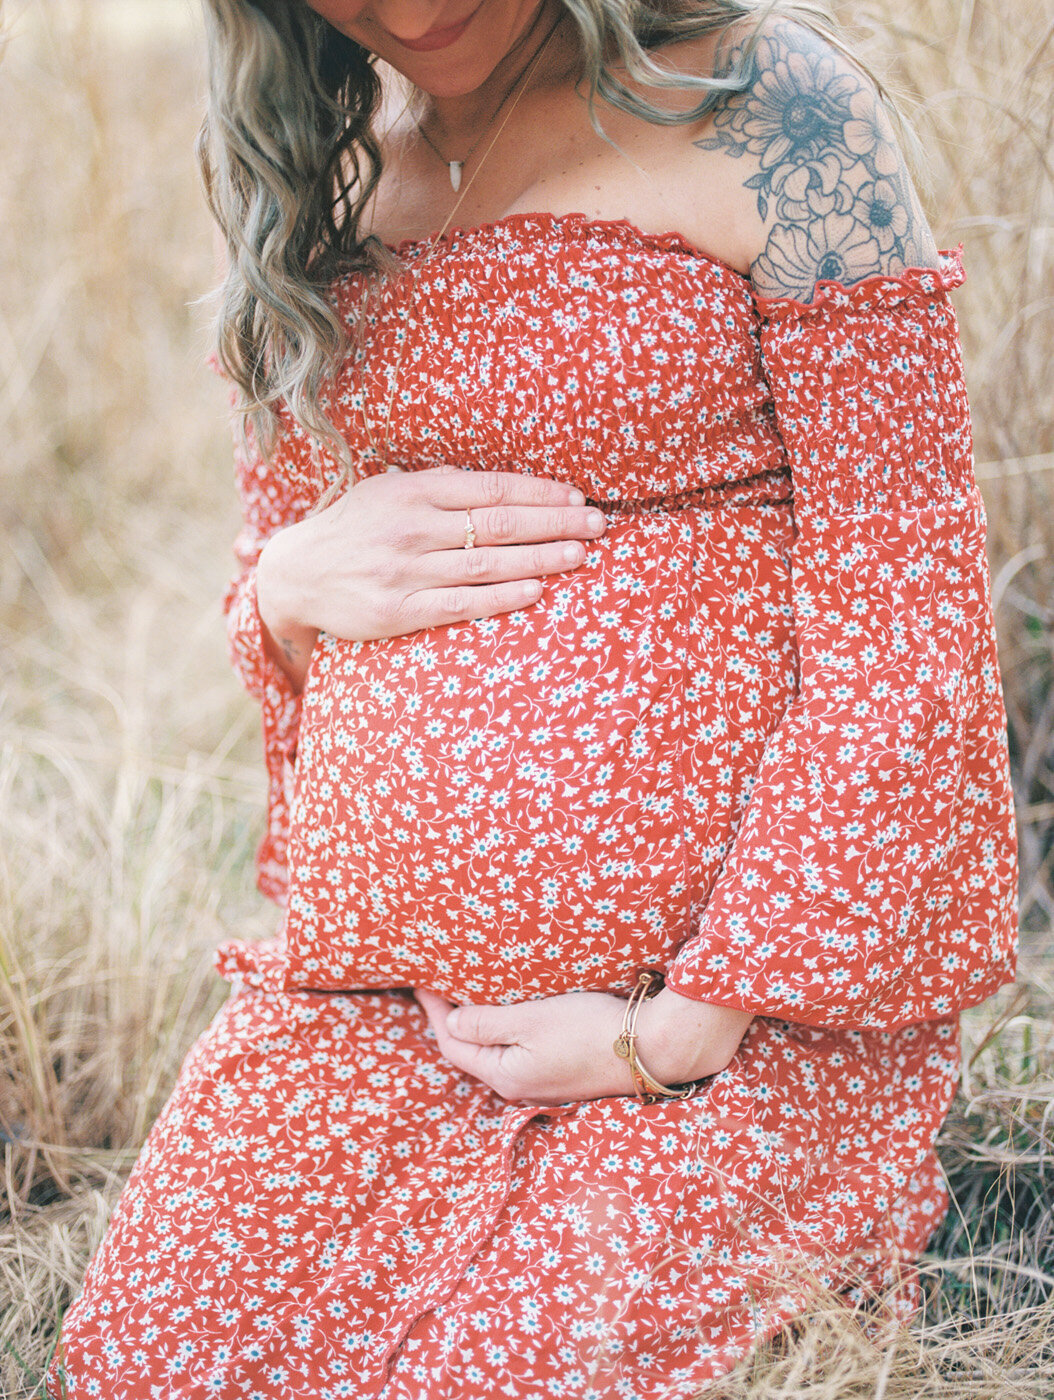 Raleigh Maternity Photographer | Jessica Agee Photography - 001